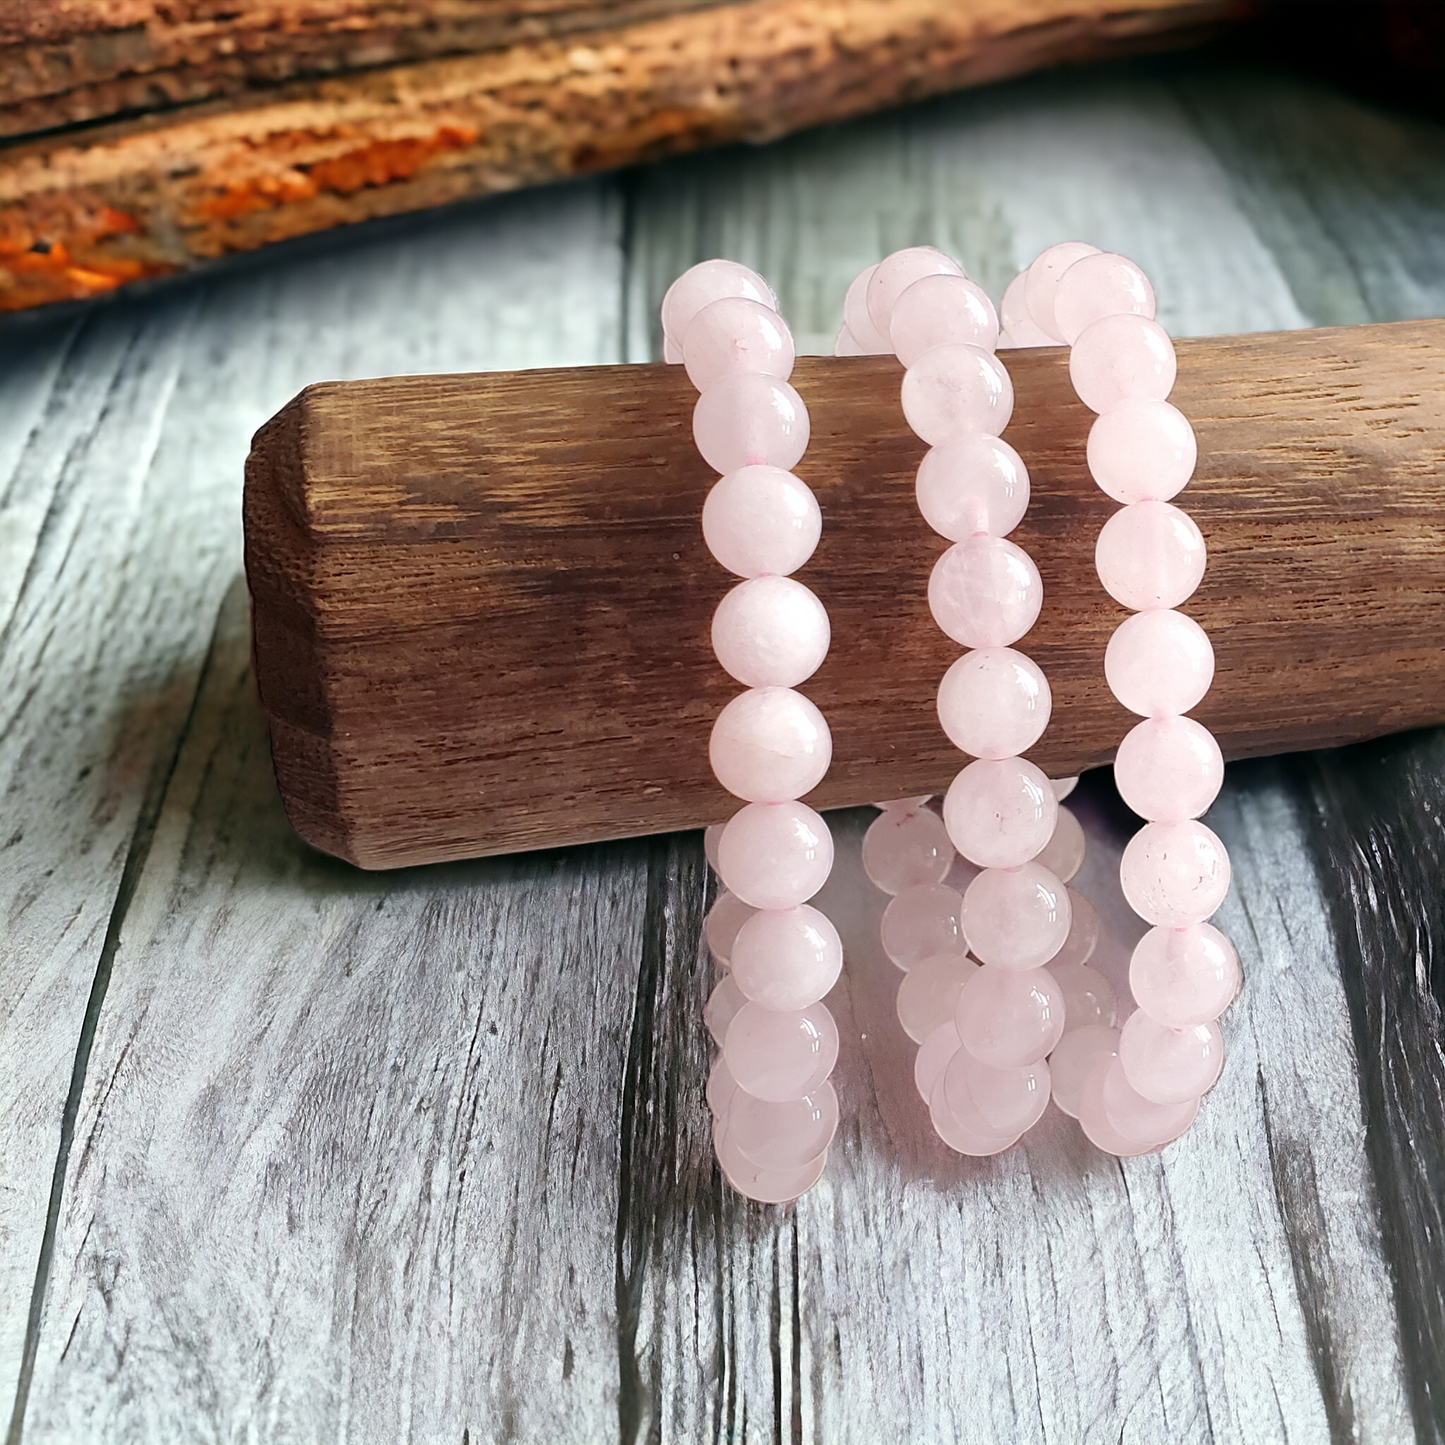 Rose Quartz Bracelet featuring 8mm beads on stretchy string for a 7-inch wrist. They are a soft pink. A blend of elegance and mysticism, radiating the soothing energies of rose quartz. Perfect accessory for love, healing, and positive vibes.